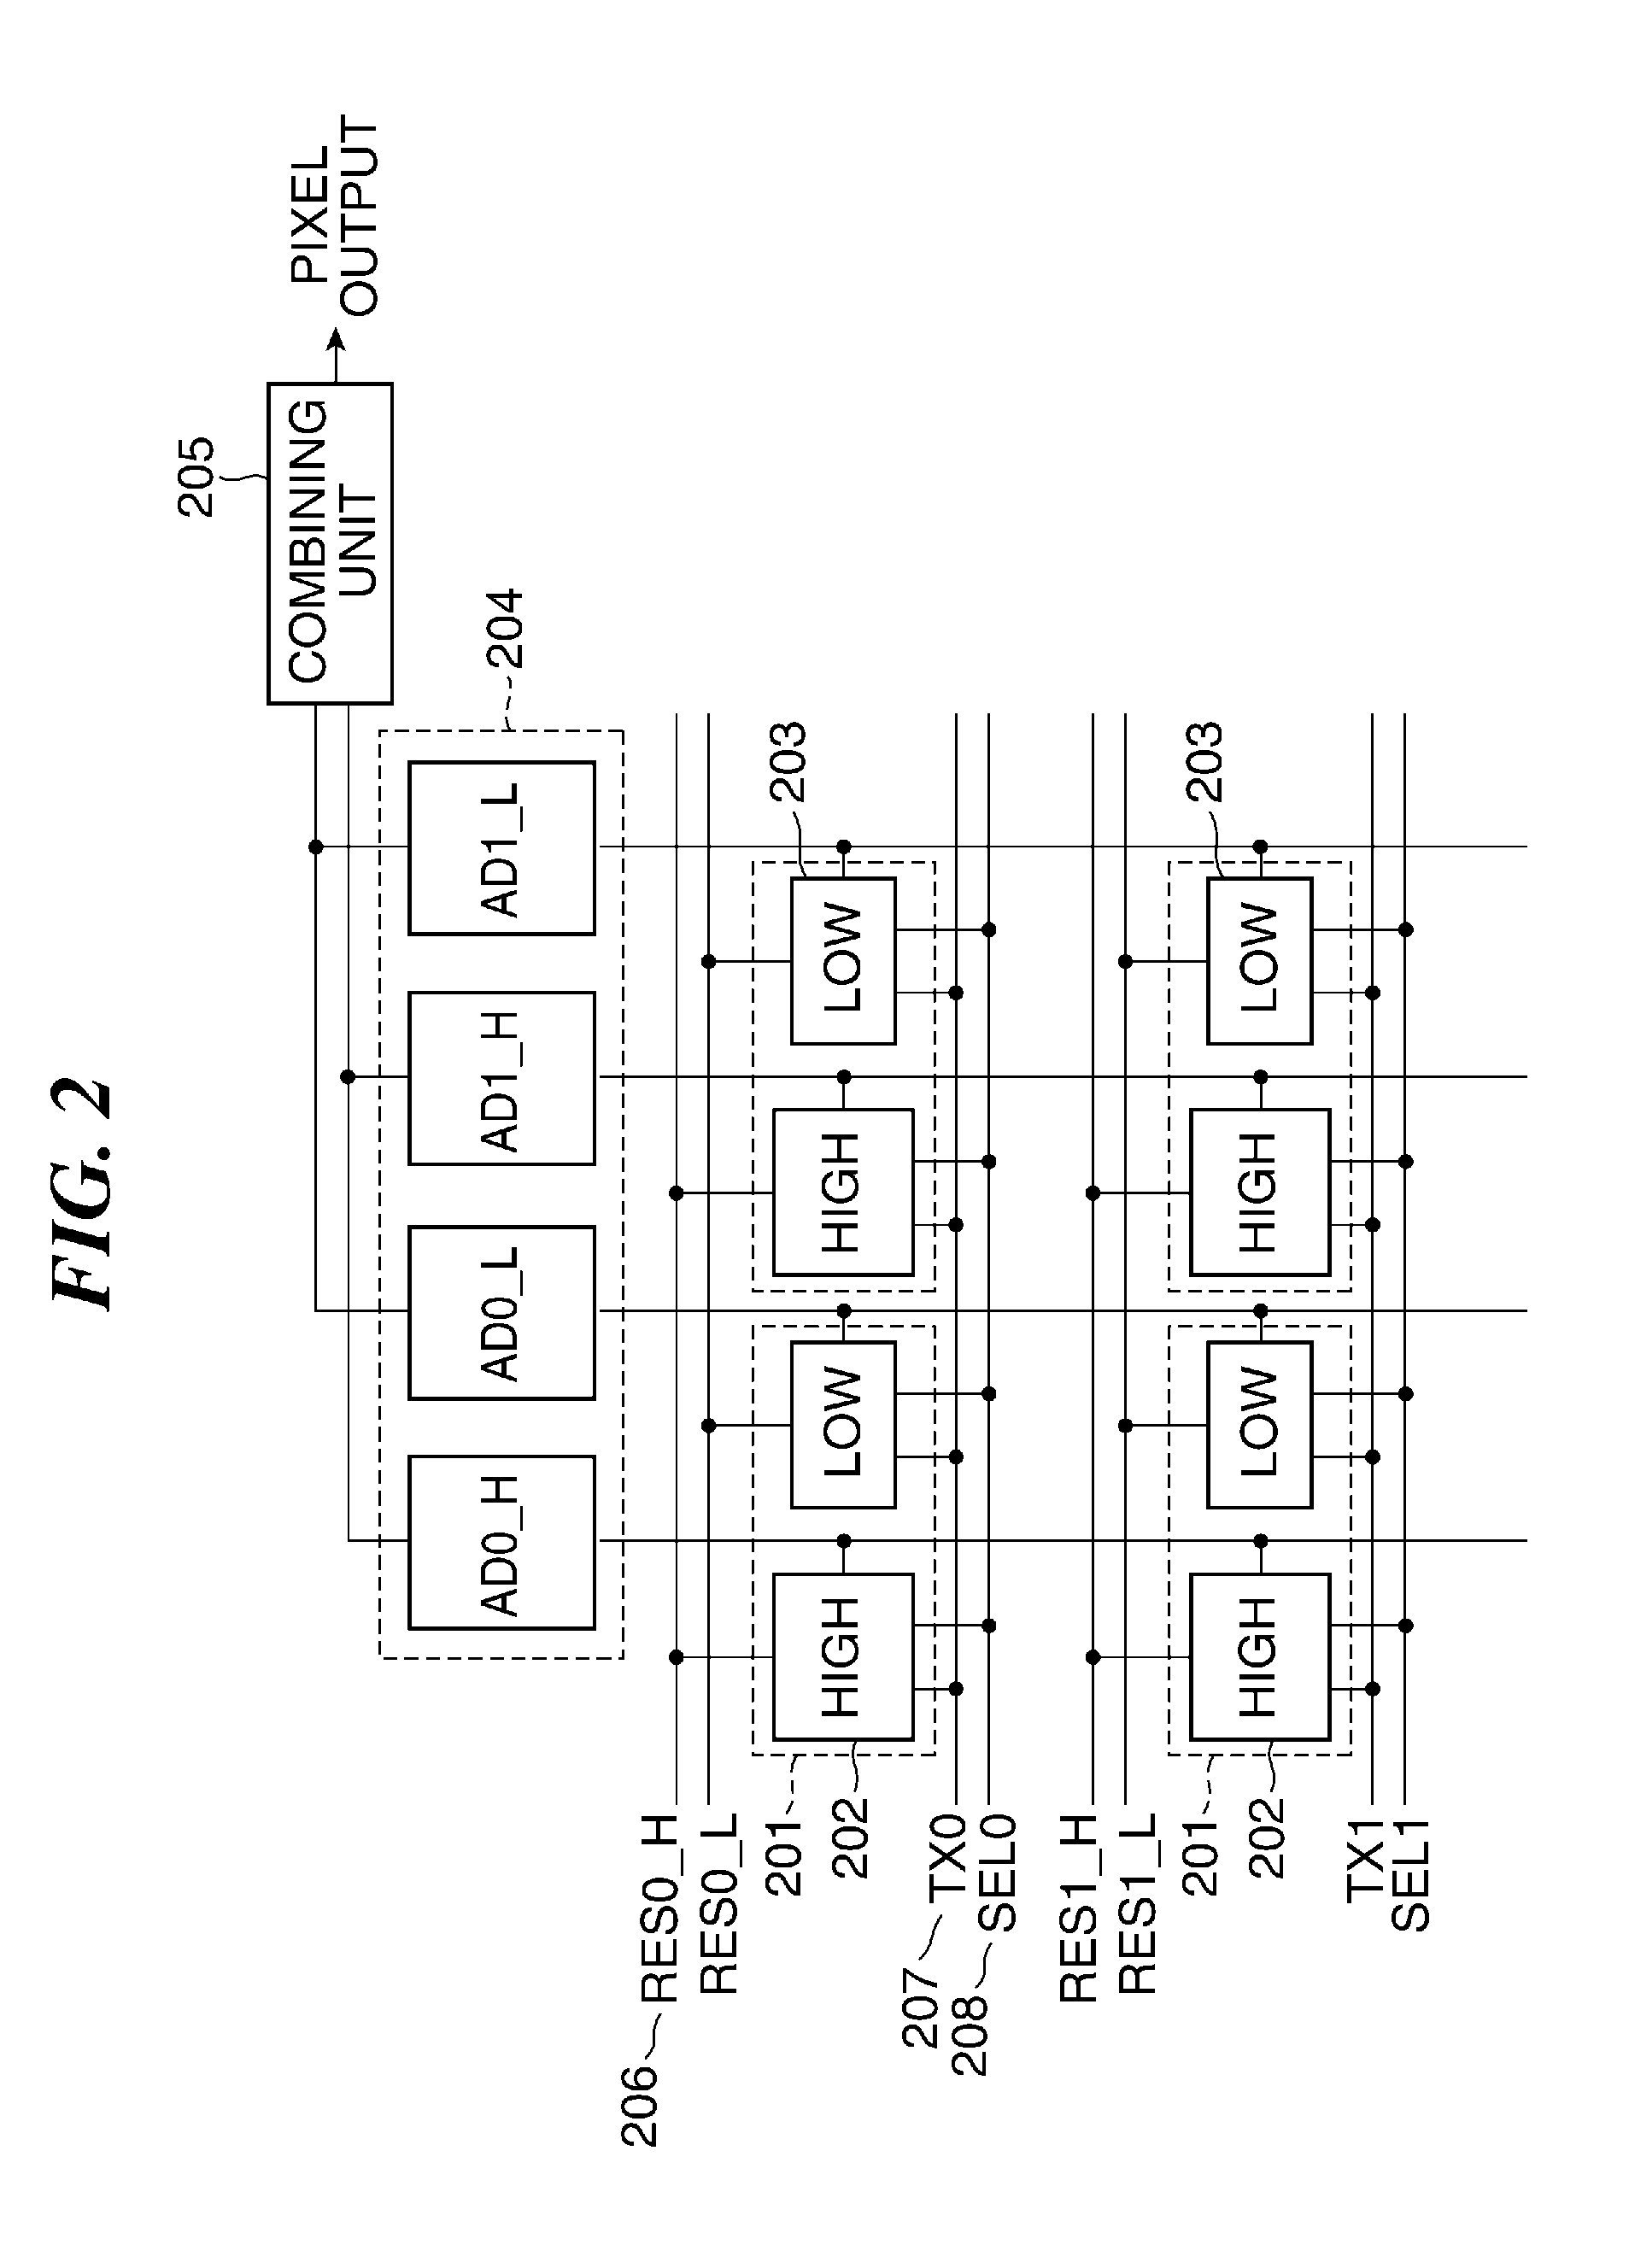 Image pickup apparatus having plurality of unit pixel areas, control method therefor, and storage medium